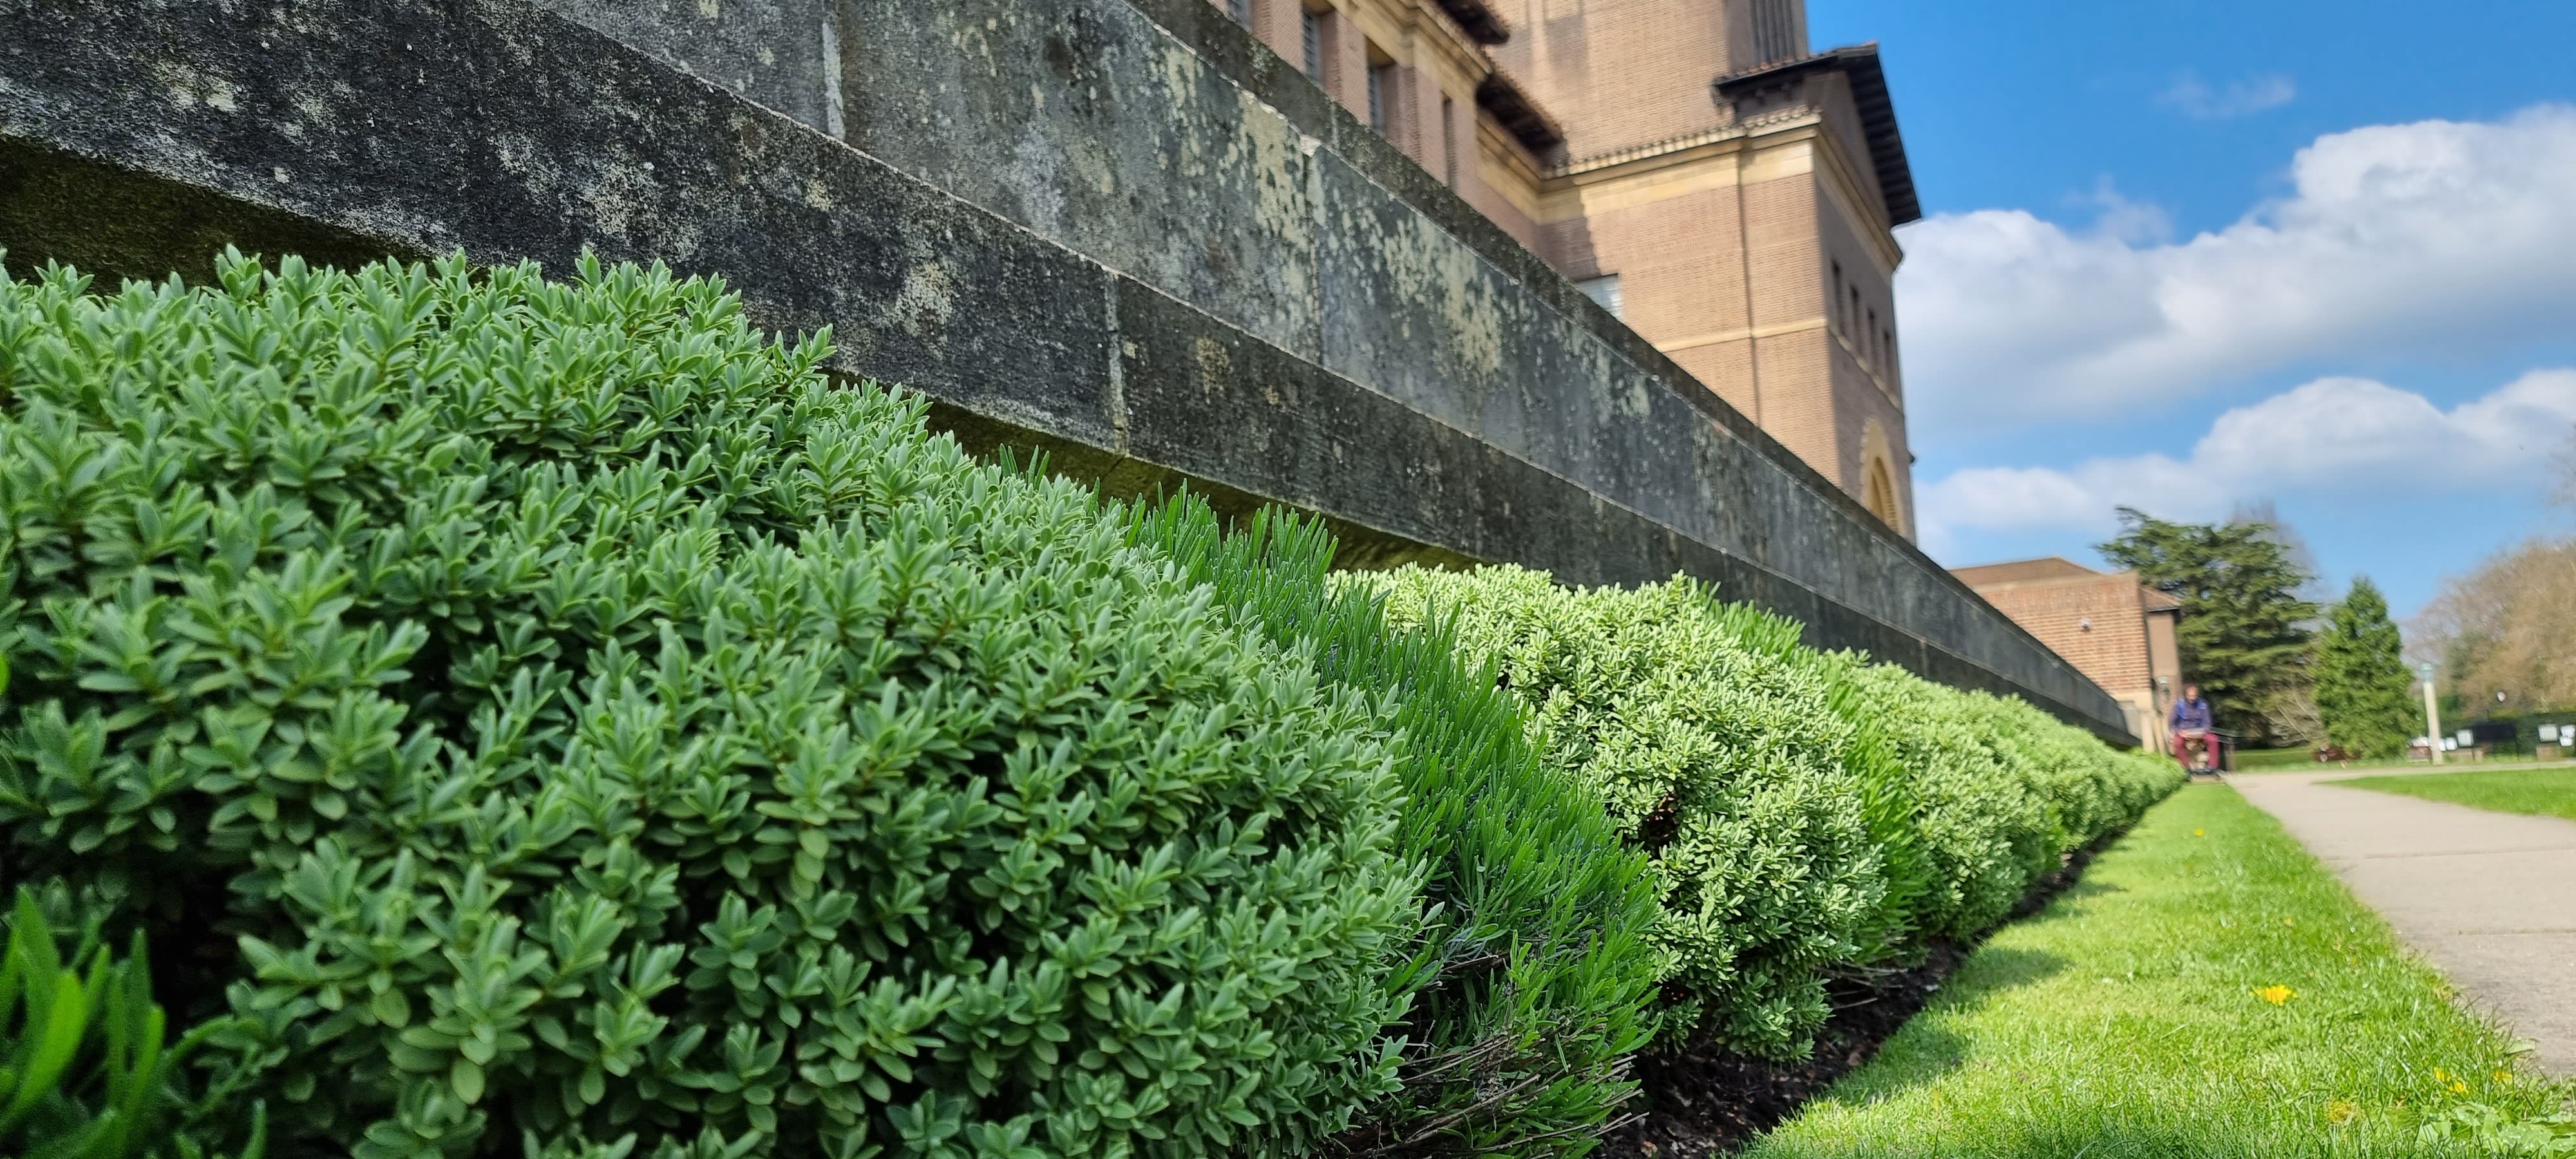 A row of green lavender shrubs recedes into the distance in front of the library entrance